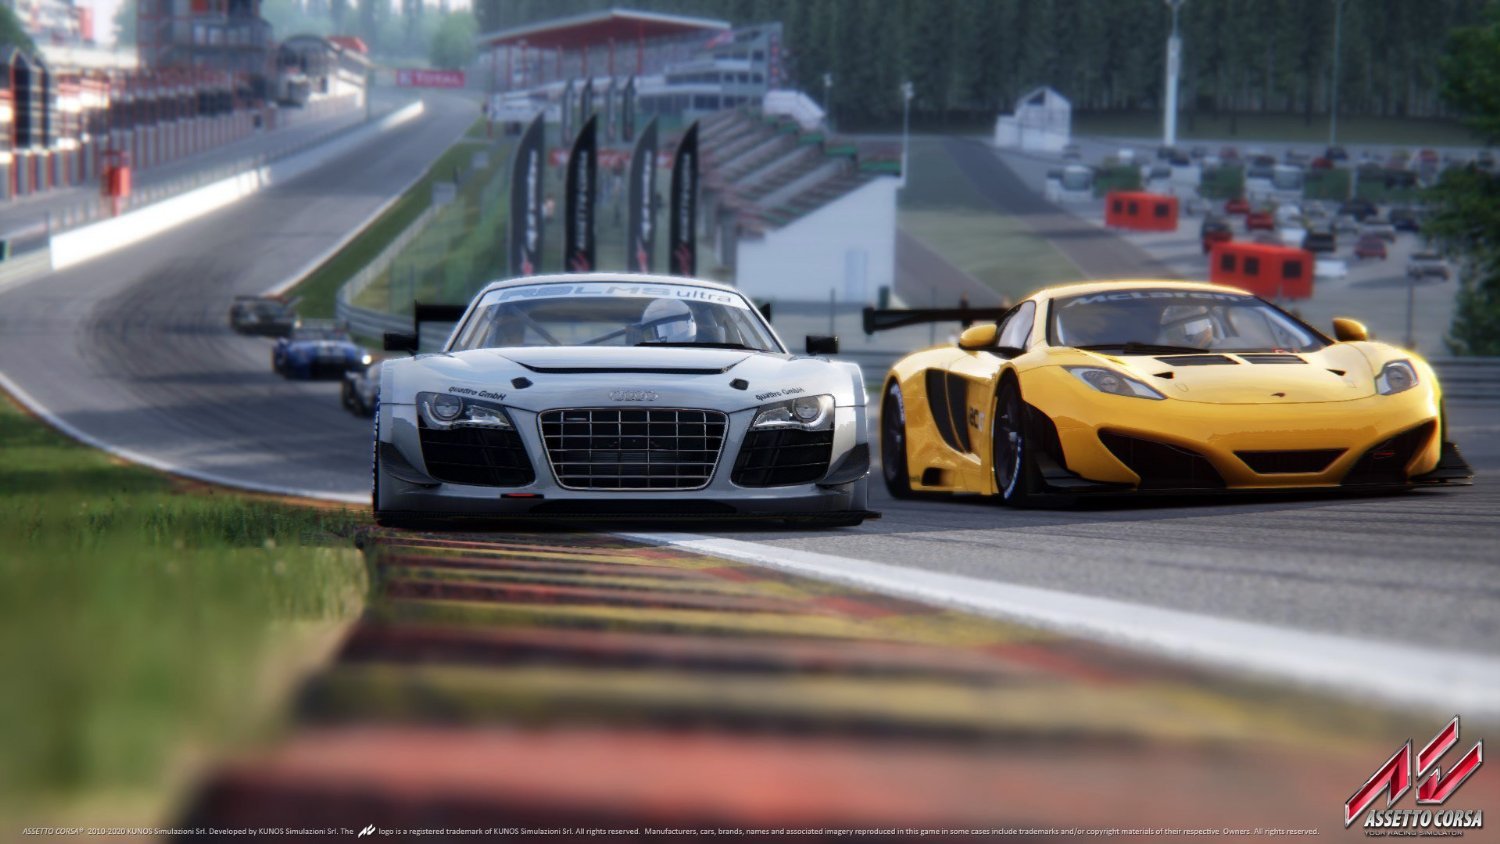 Is asseta corssa worth it for like 8 bucks and is the online still popular  : r/assettocorsa